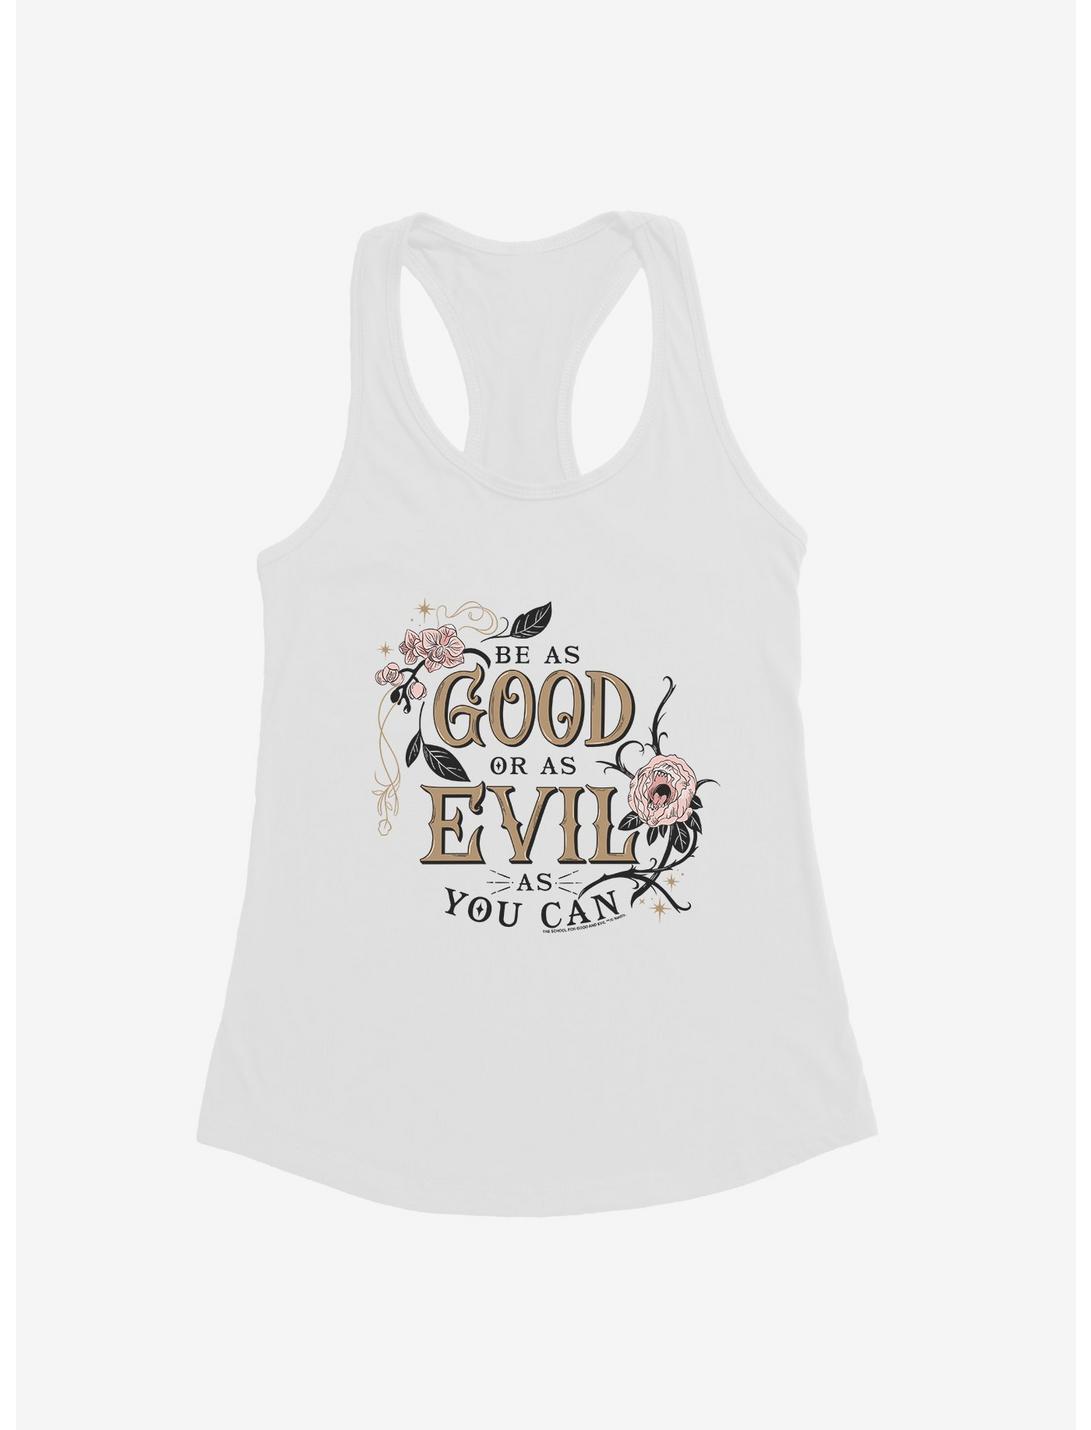 The School For Good And Evil Be As Good or Evil Womens Tank Top, WHITE, hi-res